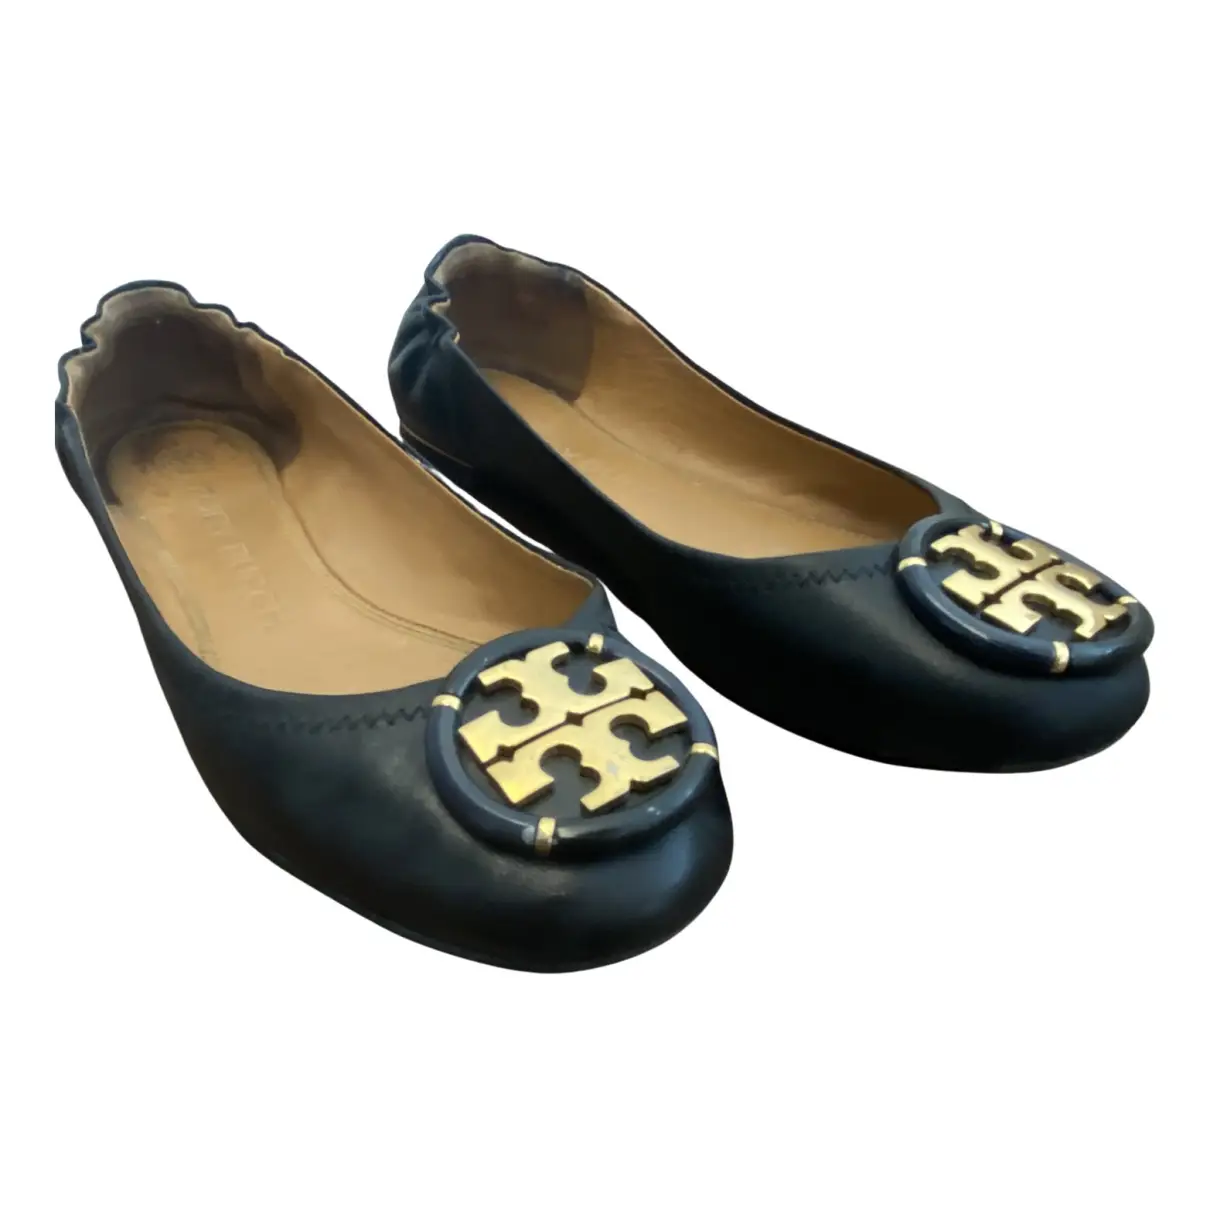 Leather ballet flats Tory Burch Navy size 6 US in Leather - 31546366